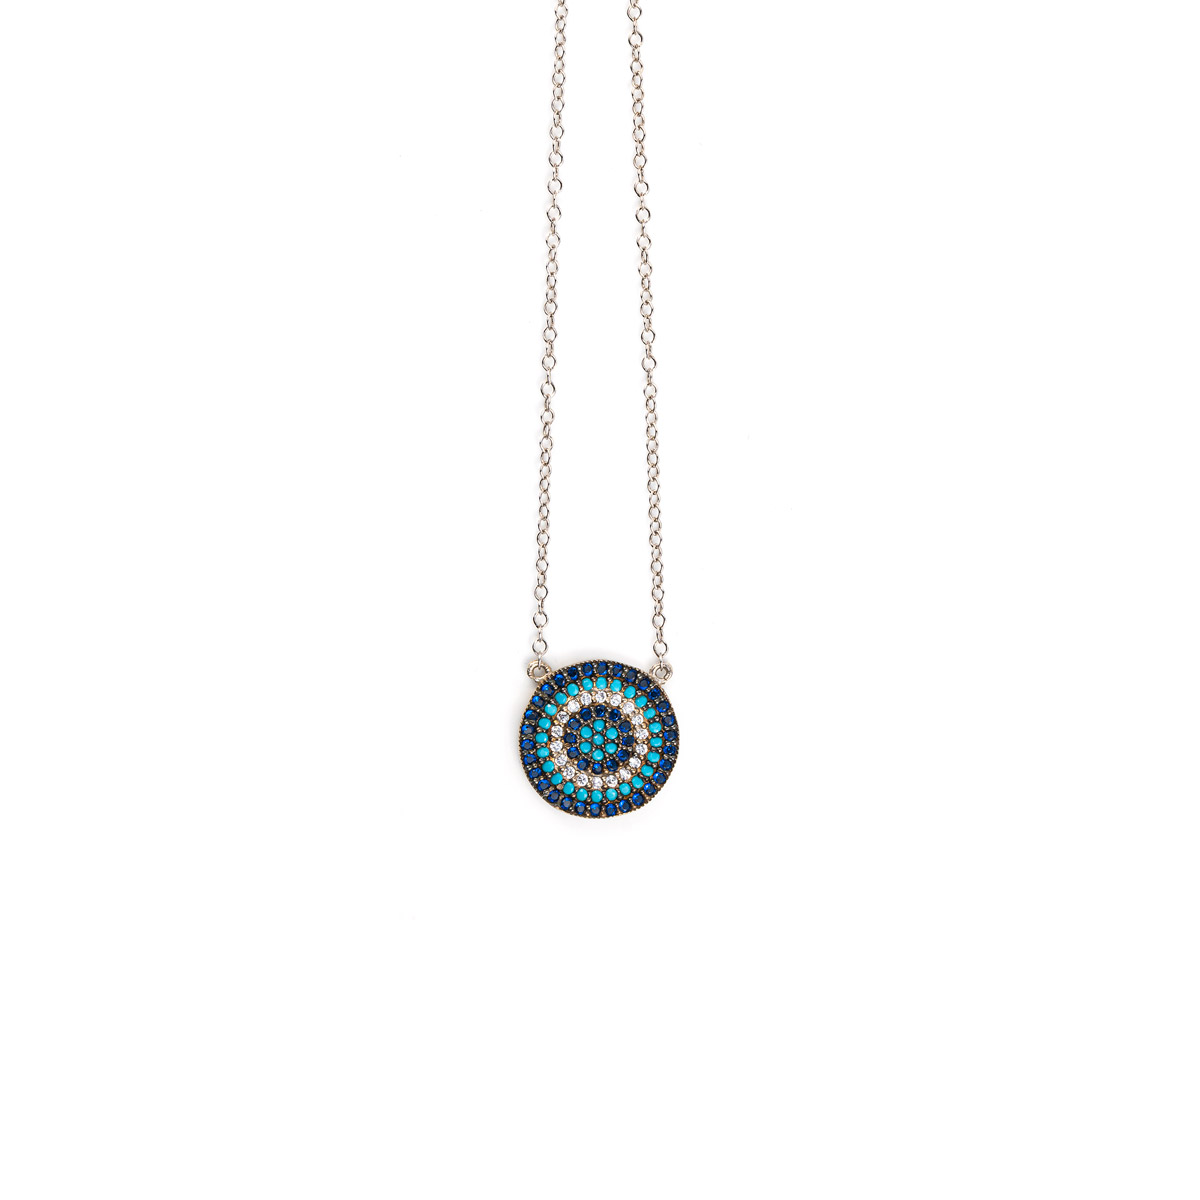 Eye Necklace with Turquoise and Zircon - 925 Sterling Silver